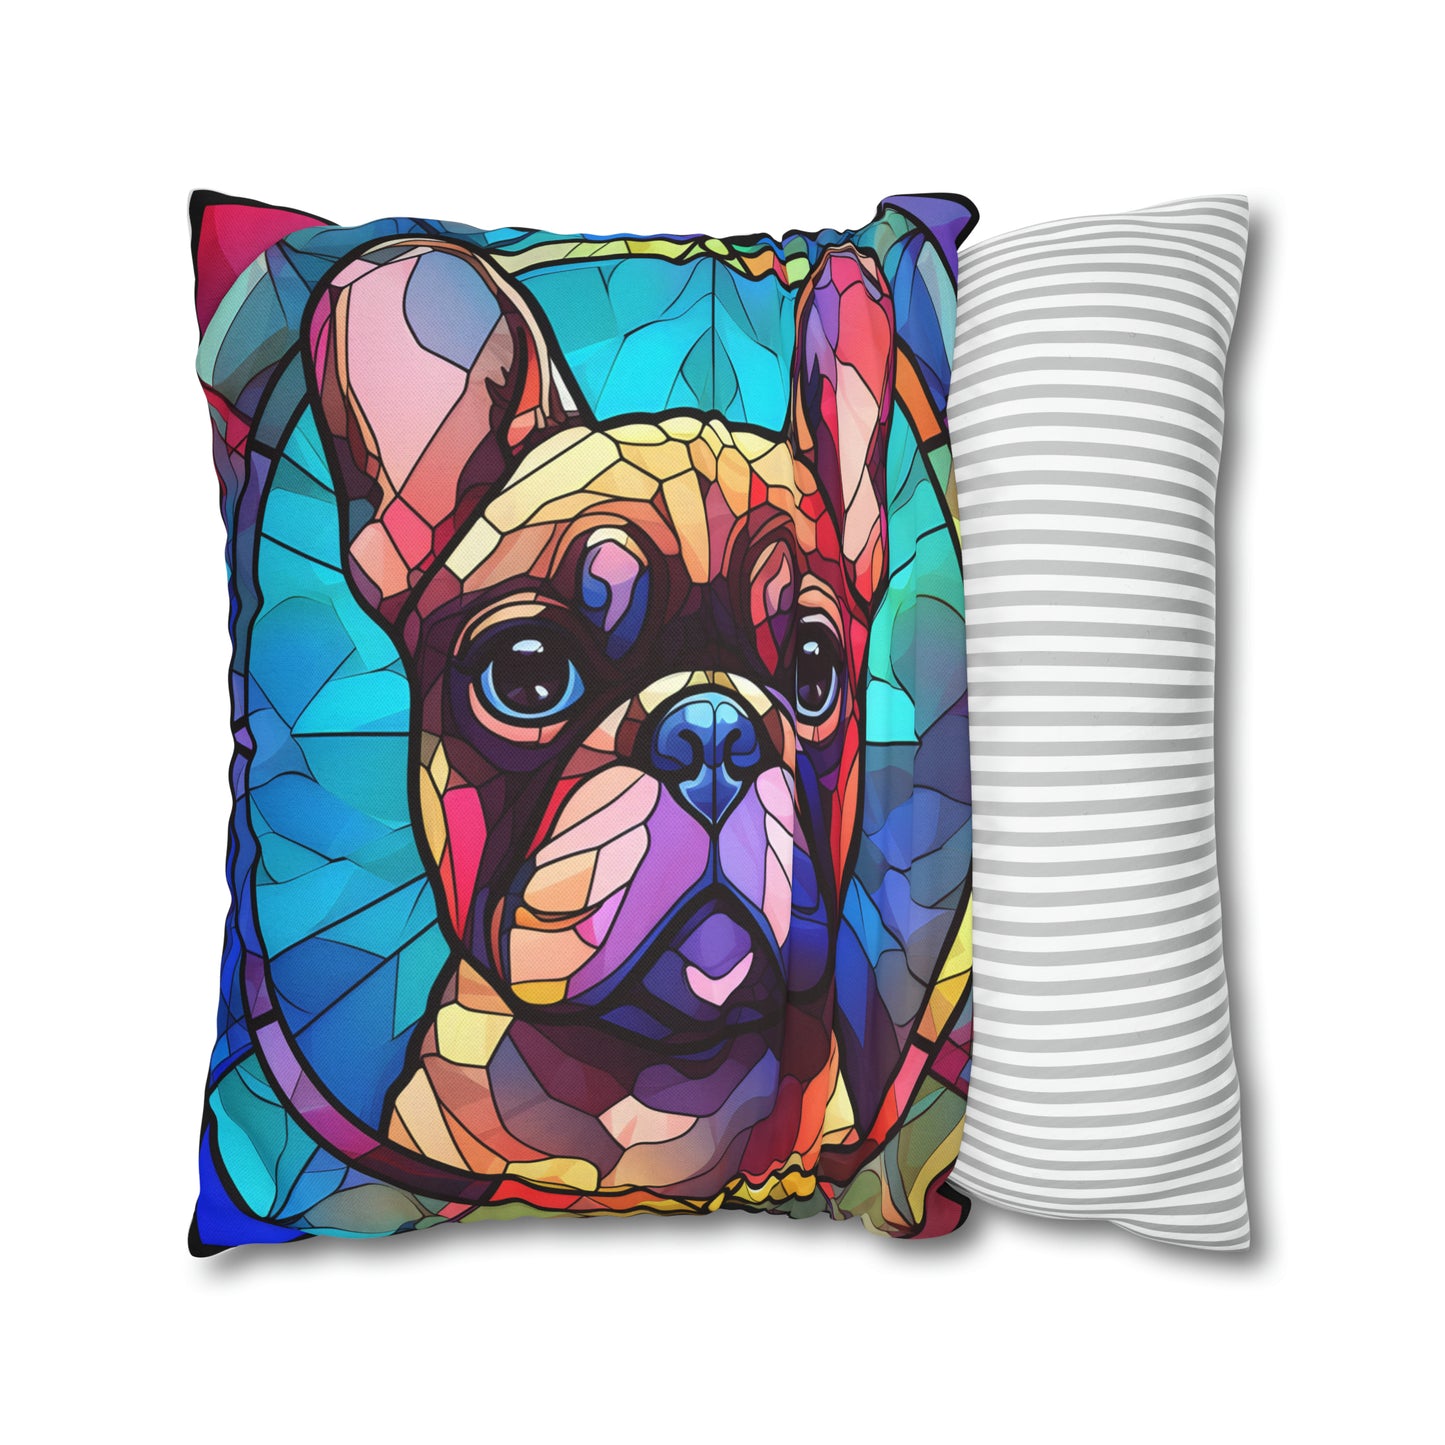 FRENCH BULLDOG Square Pillow Case